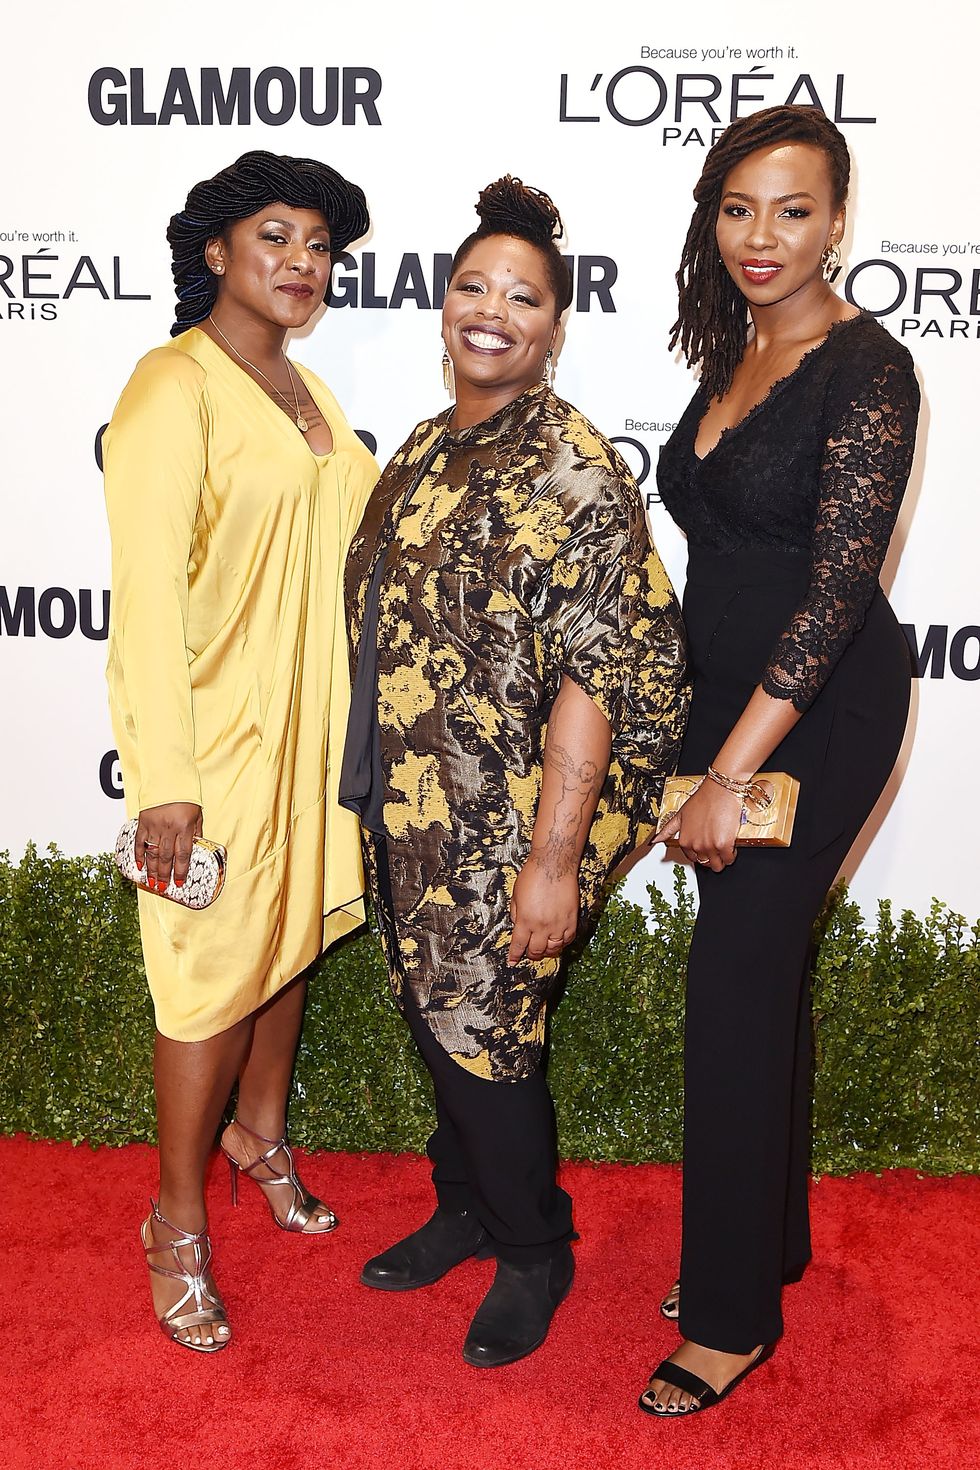 https://hips.hearstapps.com/hmg-prod.s3.amazonaws.com/images/alicia-garza-patrisse-cullors-and-opal-tometi-attend-the-news-photo-1610572626.?crop=1xw:1xh;center,top&resize=980:*